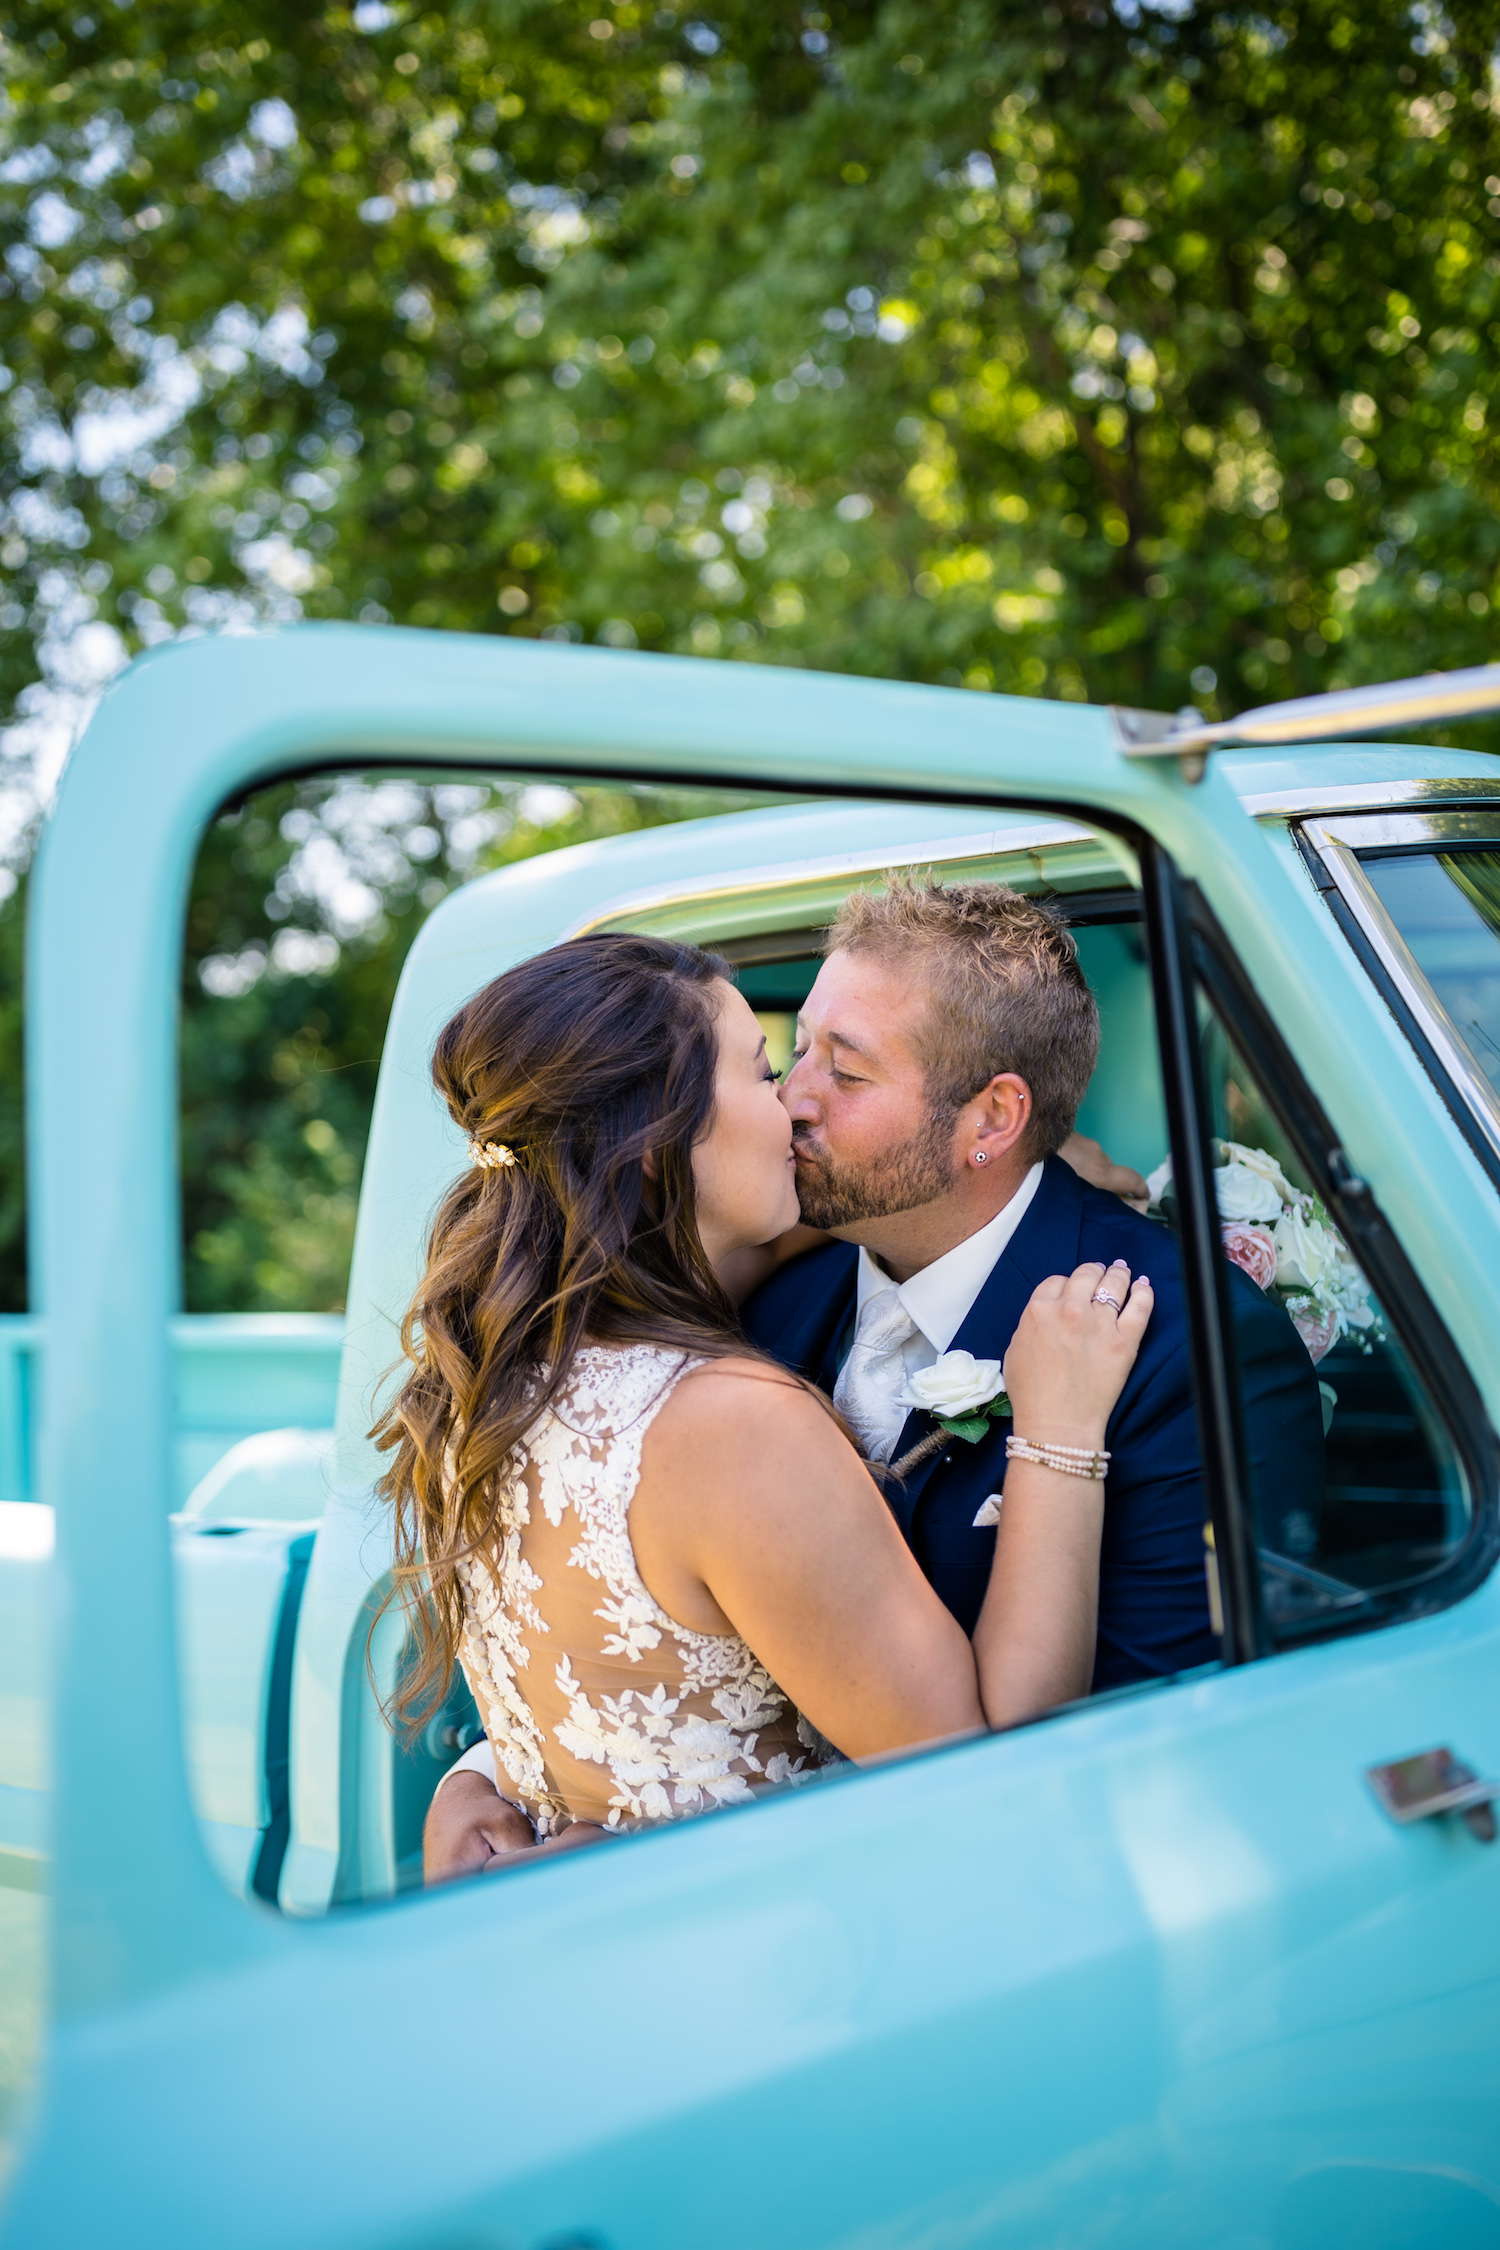 The Ultimate Ranch Wedding Planning Guide (2021). Bride and groom share a kiss in a baby blue truck.